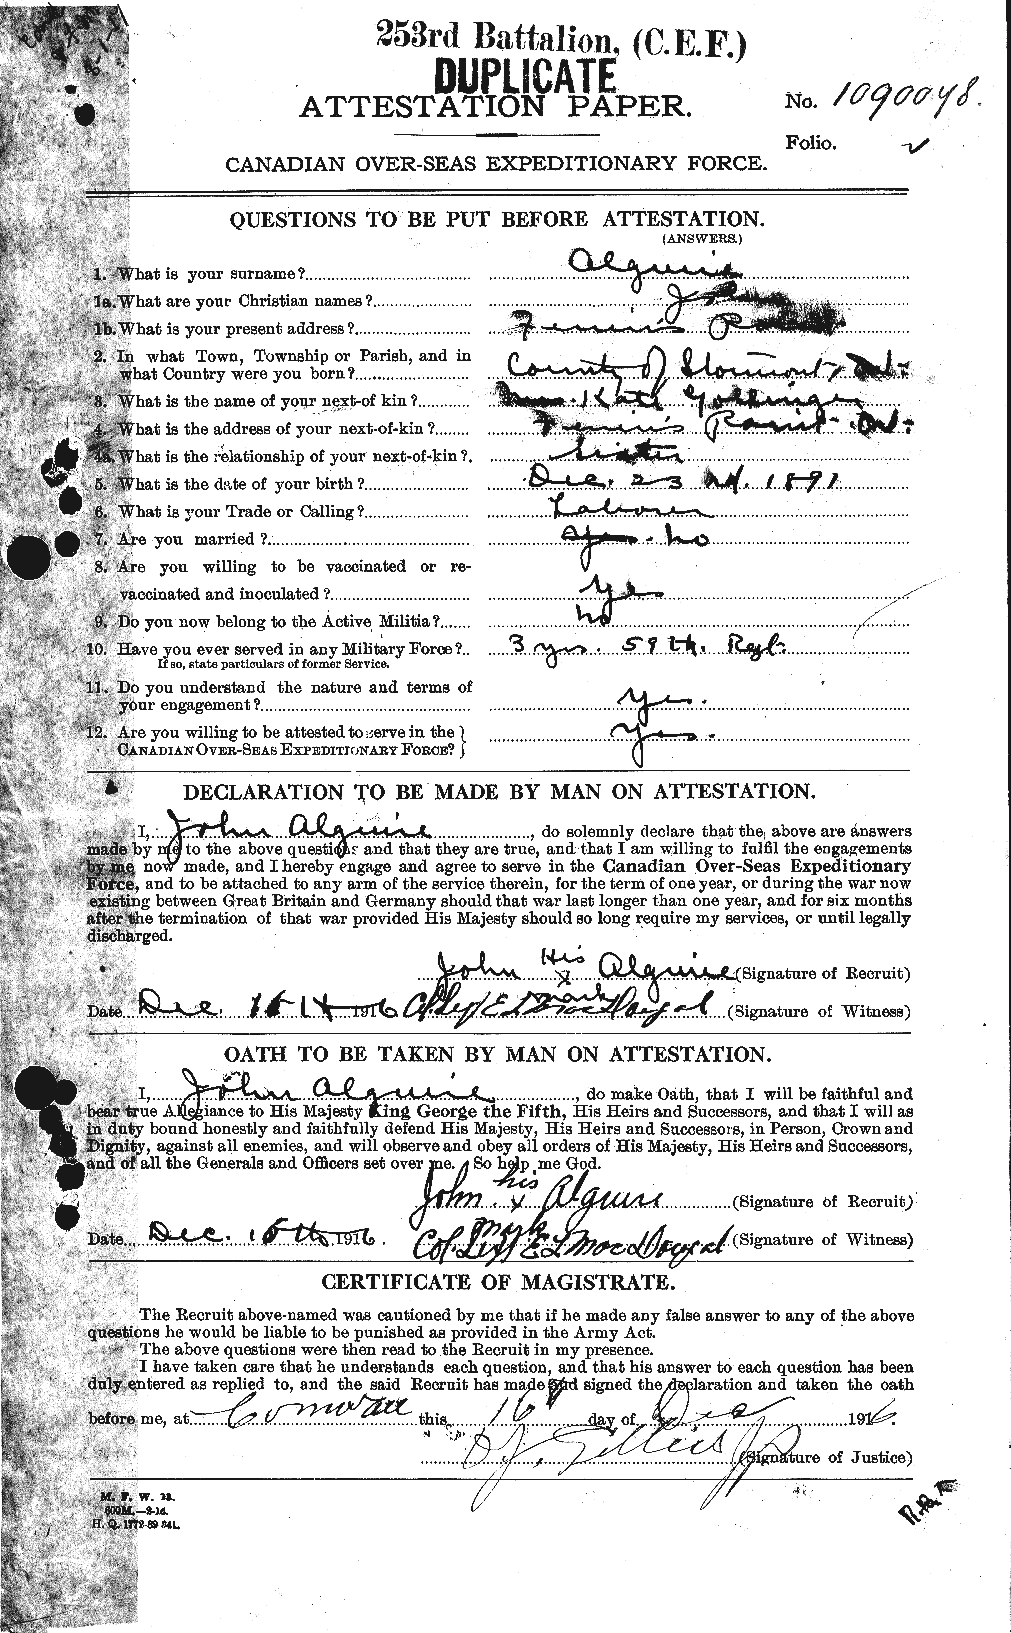 Personnel Records of the First World War - CEF 205081a